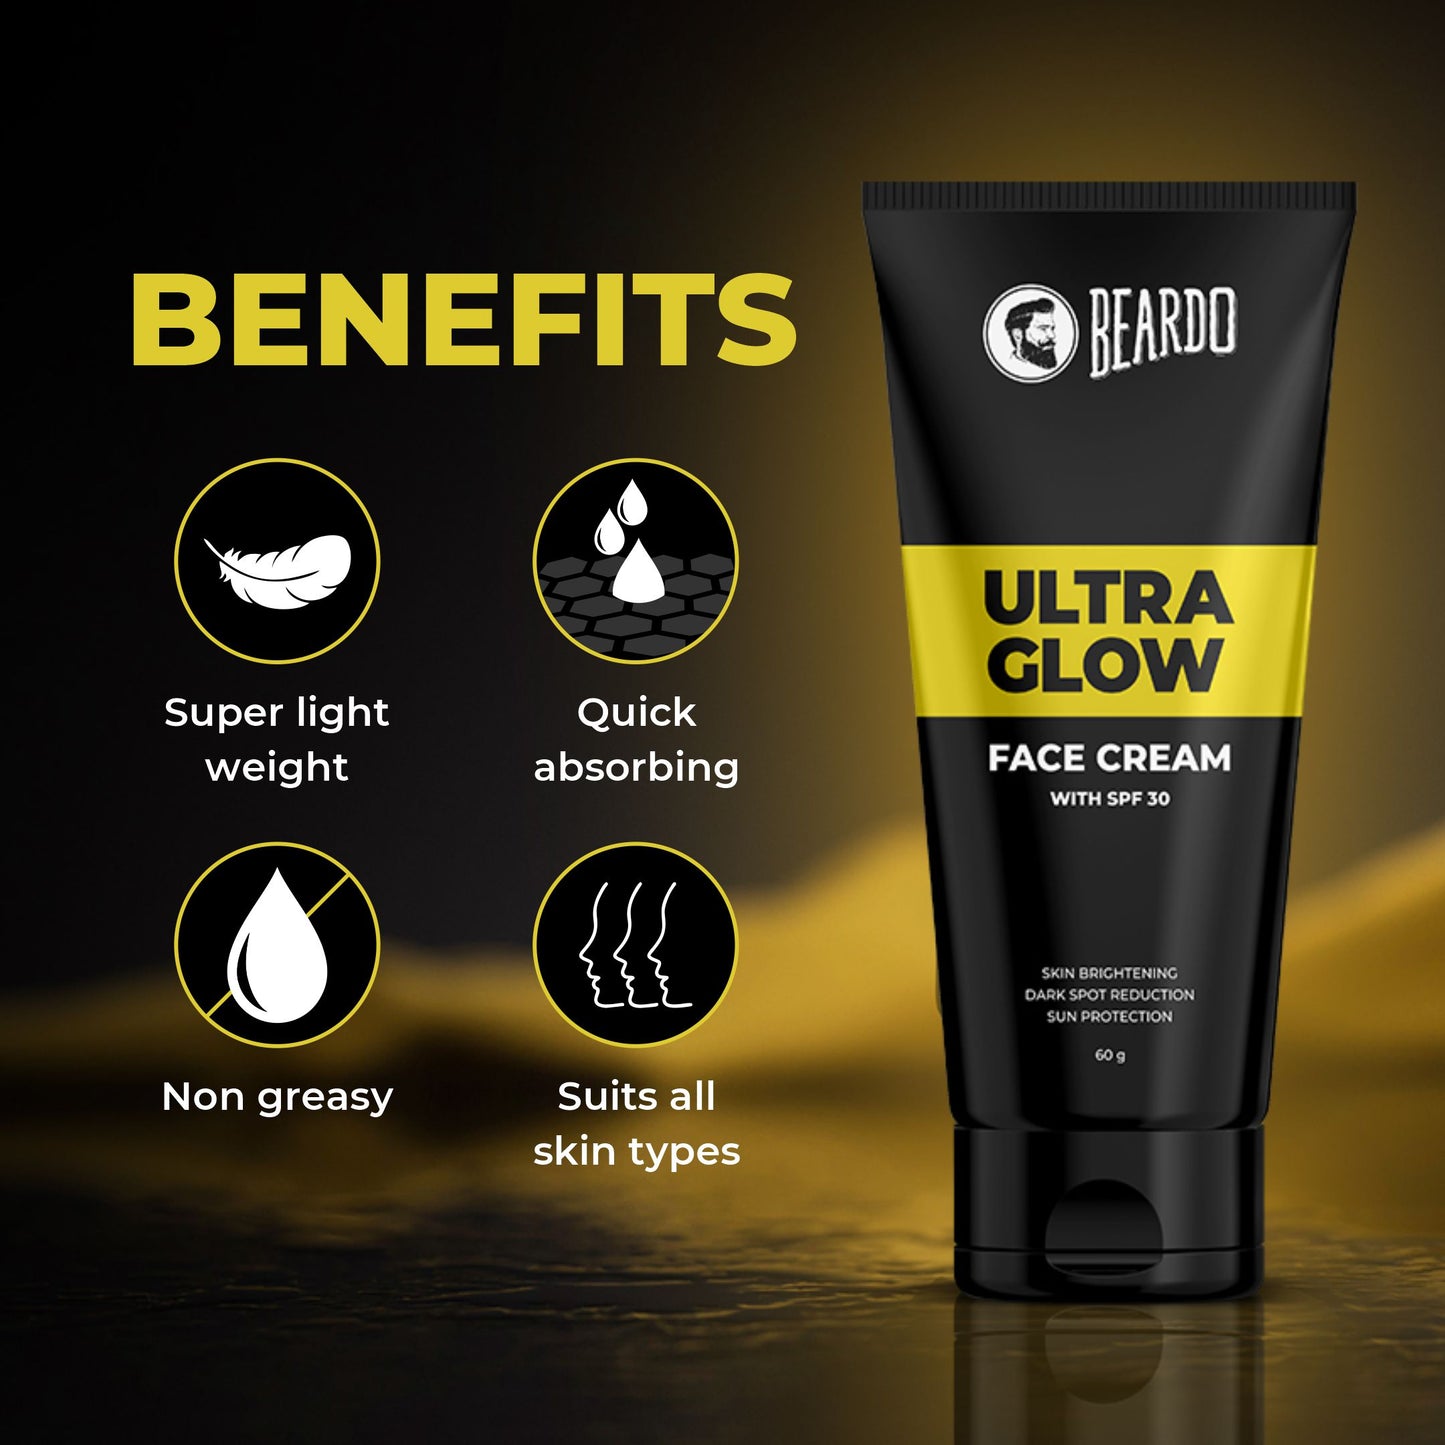 ultraglow face cream benefits, face cream for all skin types